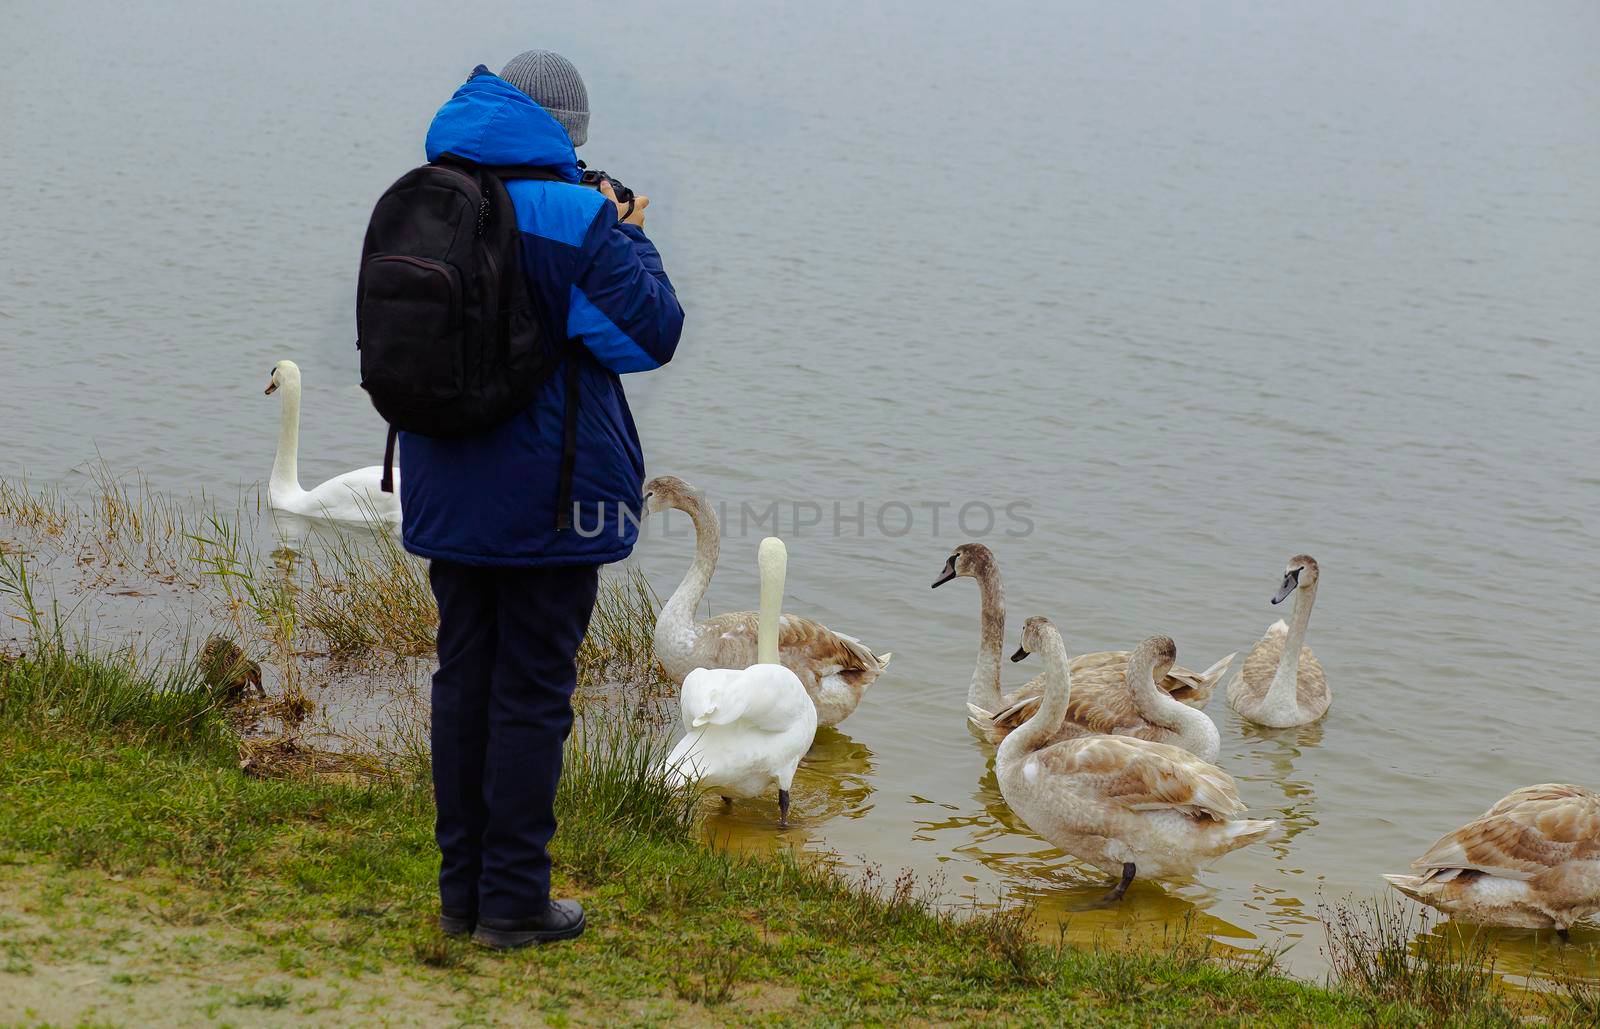 A young boy photographs nature in the Park and swans near the water